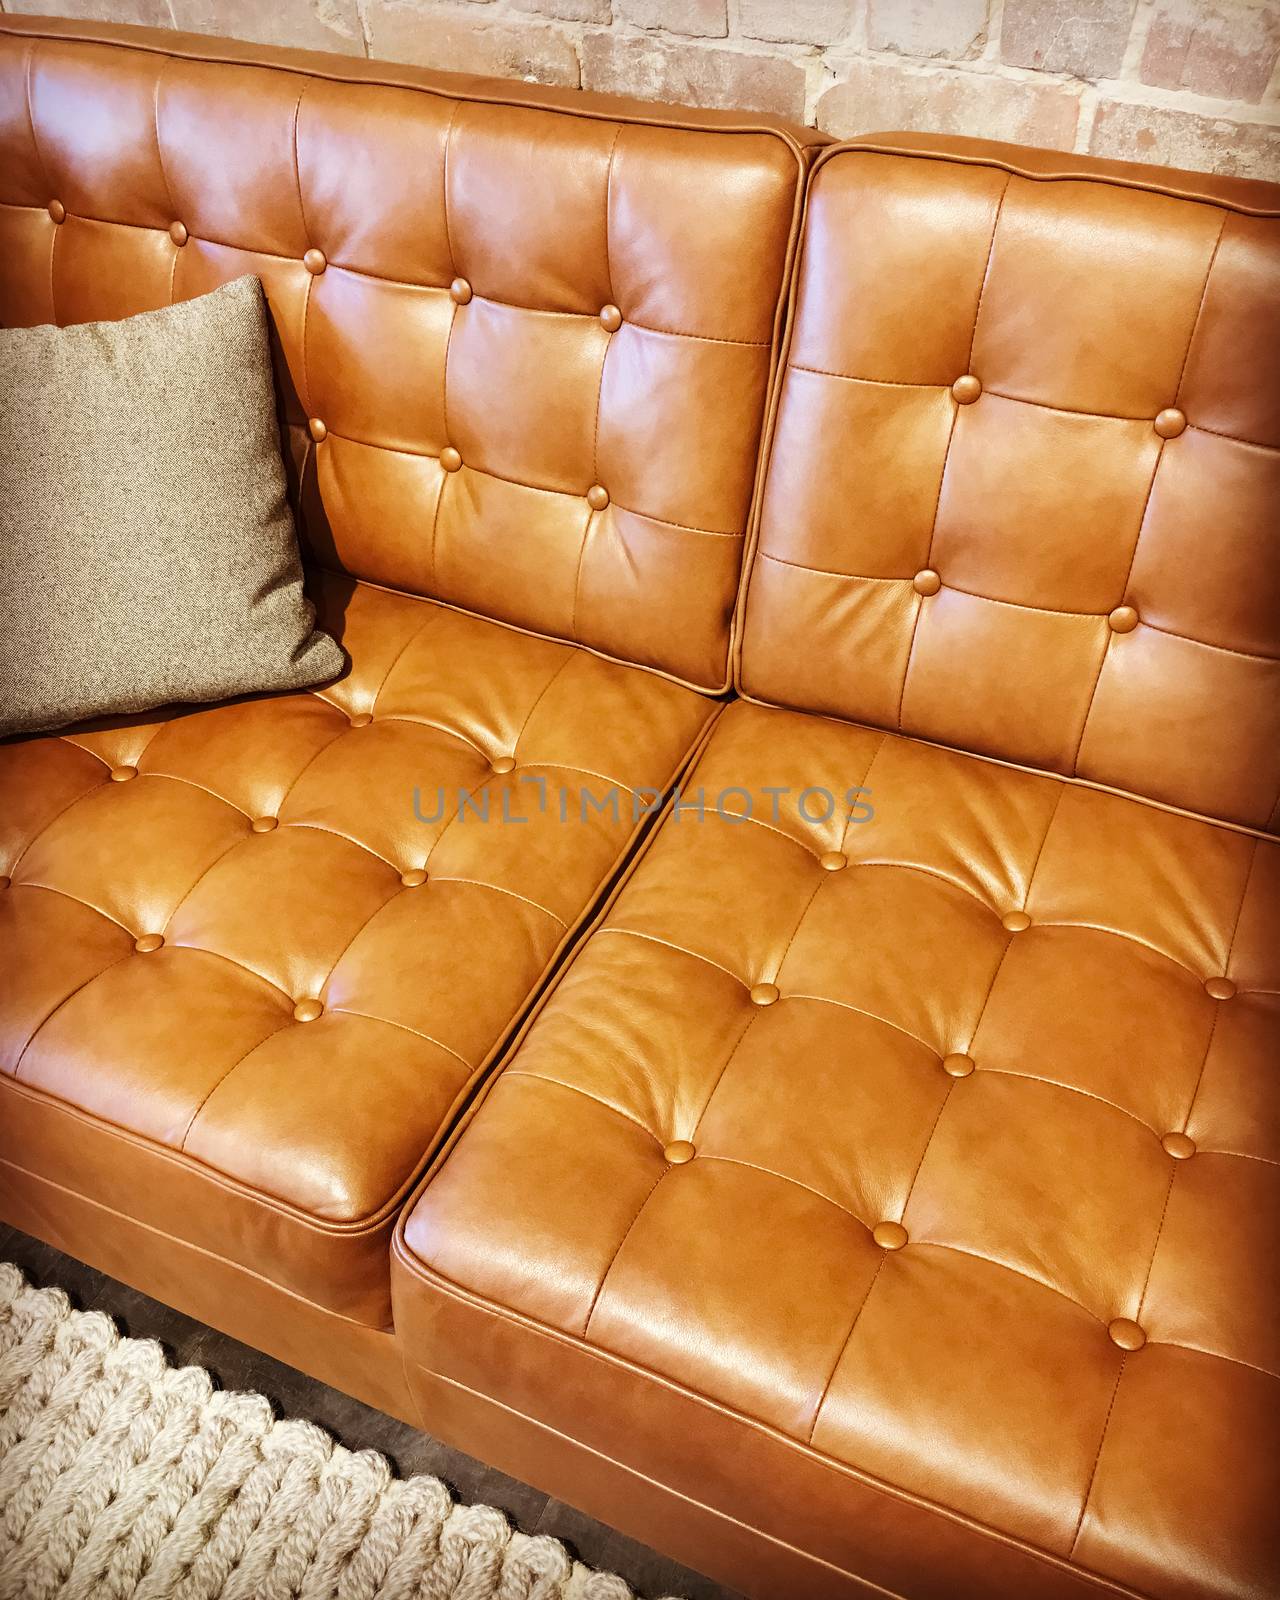 Luxurious brown leather sofa with cushion by anikasalsera